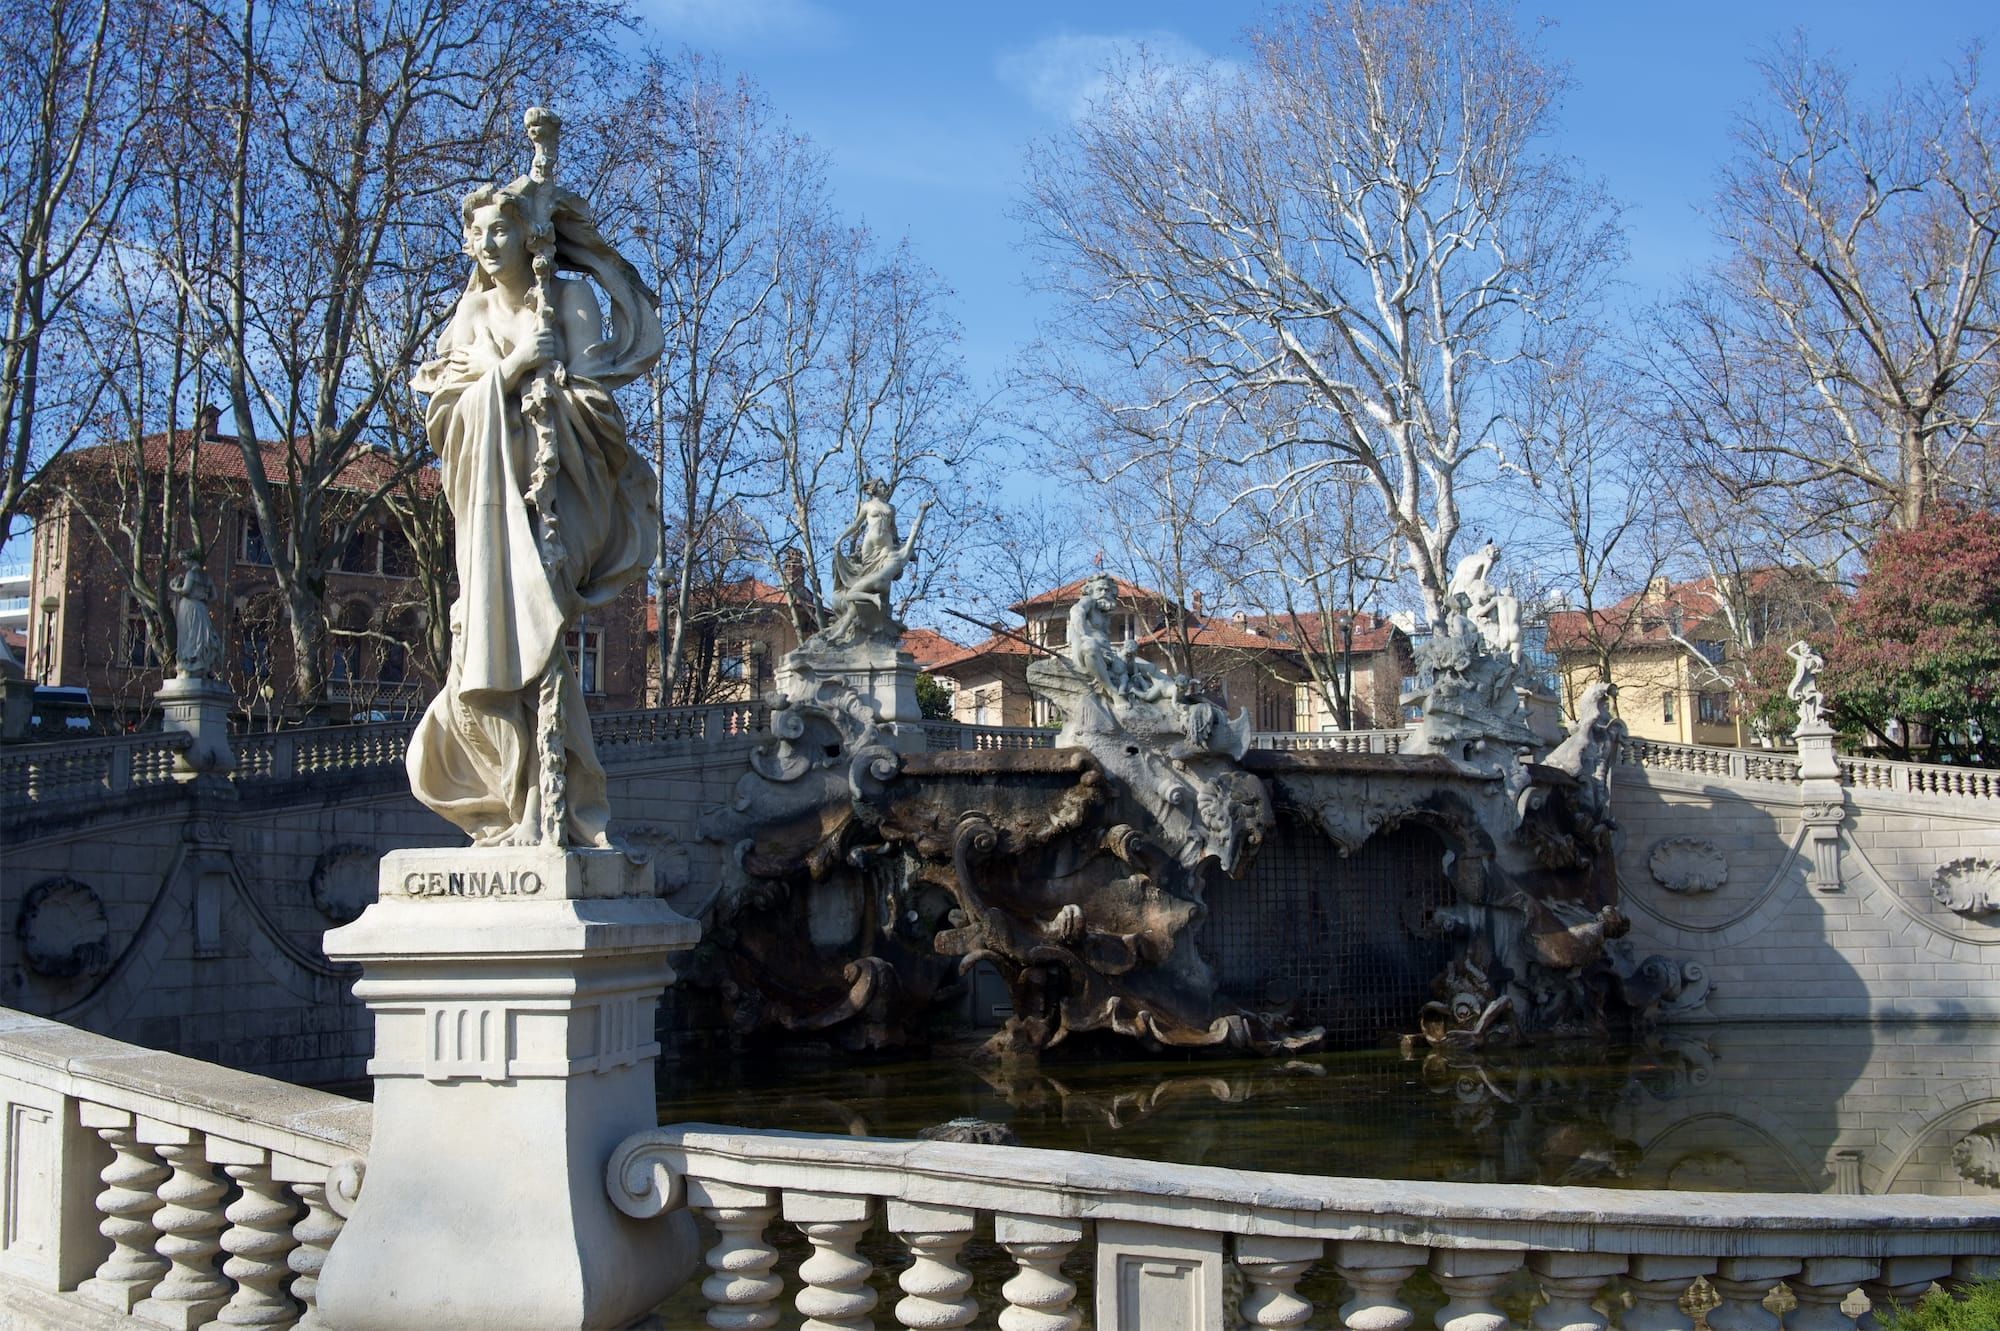 Fountain of 12 months - Turin: an itinerary between elegance and sweetness